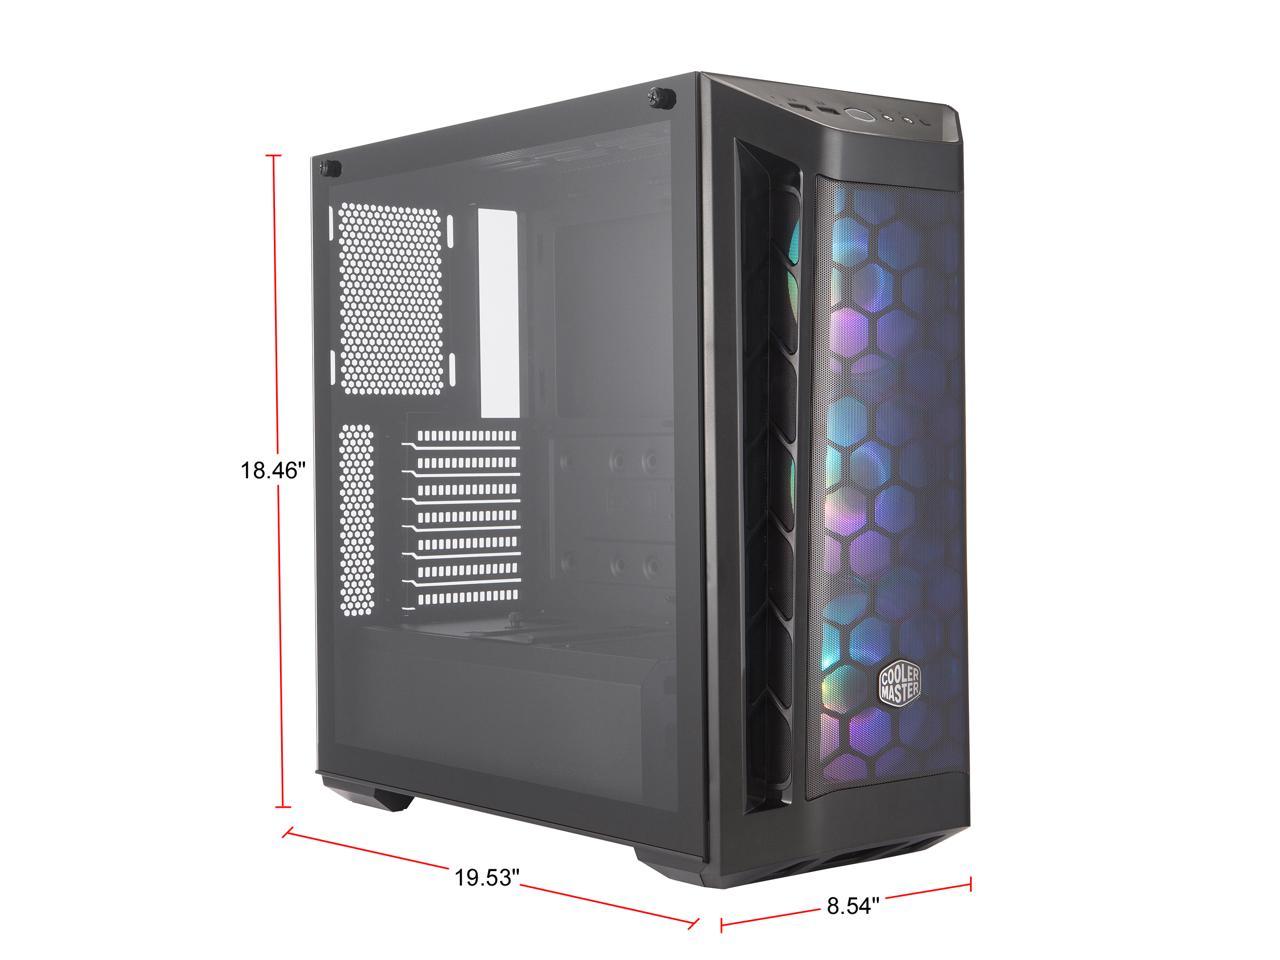 Cooler Master MasterBox MB511 ARGB ATX Mid-Tower with ARGB Lighting System, Three 120mm ARGB Fans, Fine Mesh Front Panel, Mesh Side Intakes, and Tempered Glass. MCB-B511D-KGNN-RGA